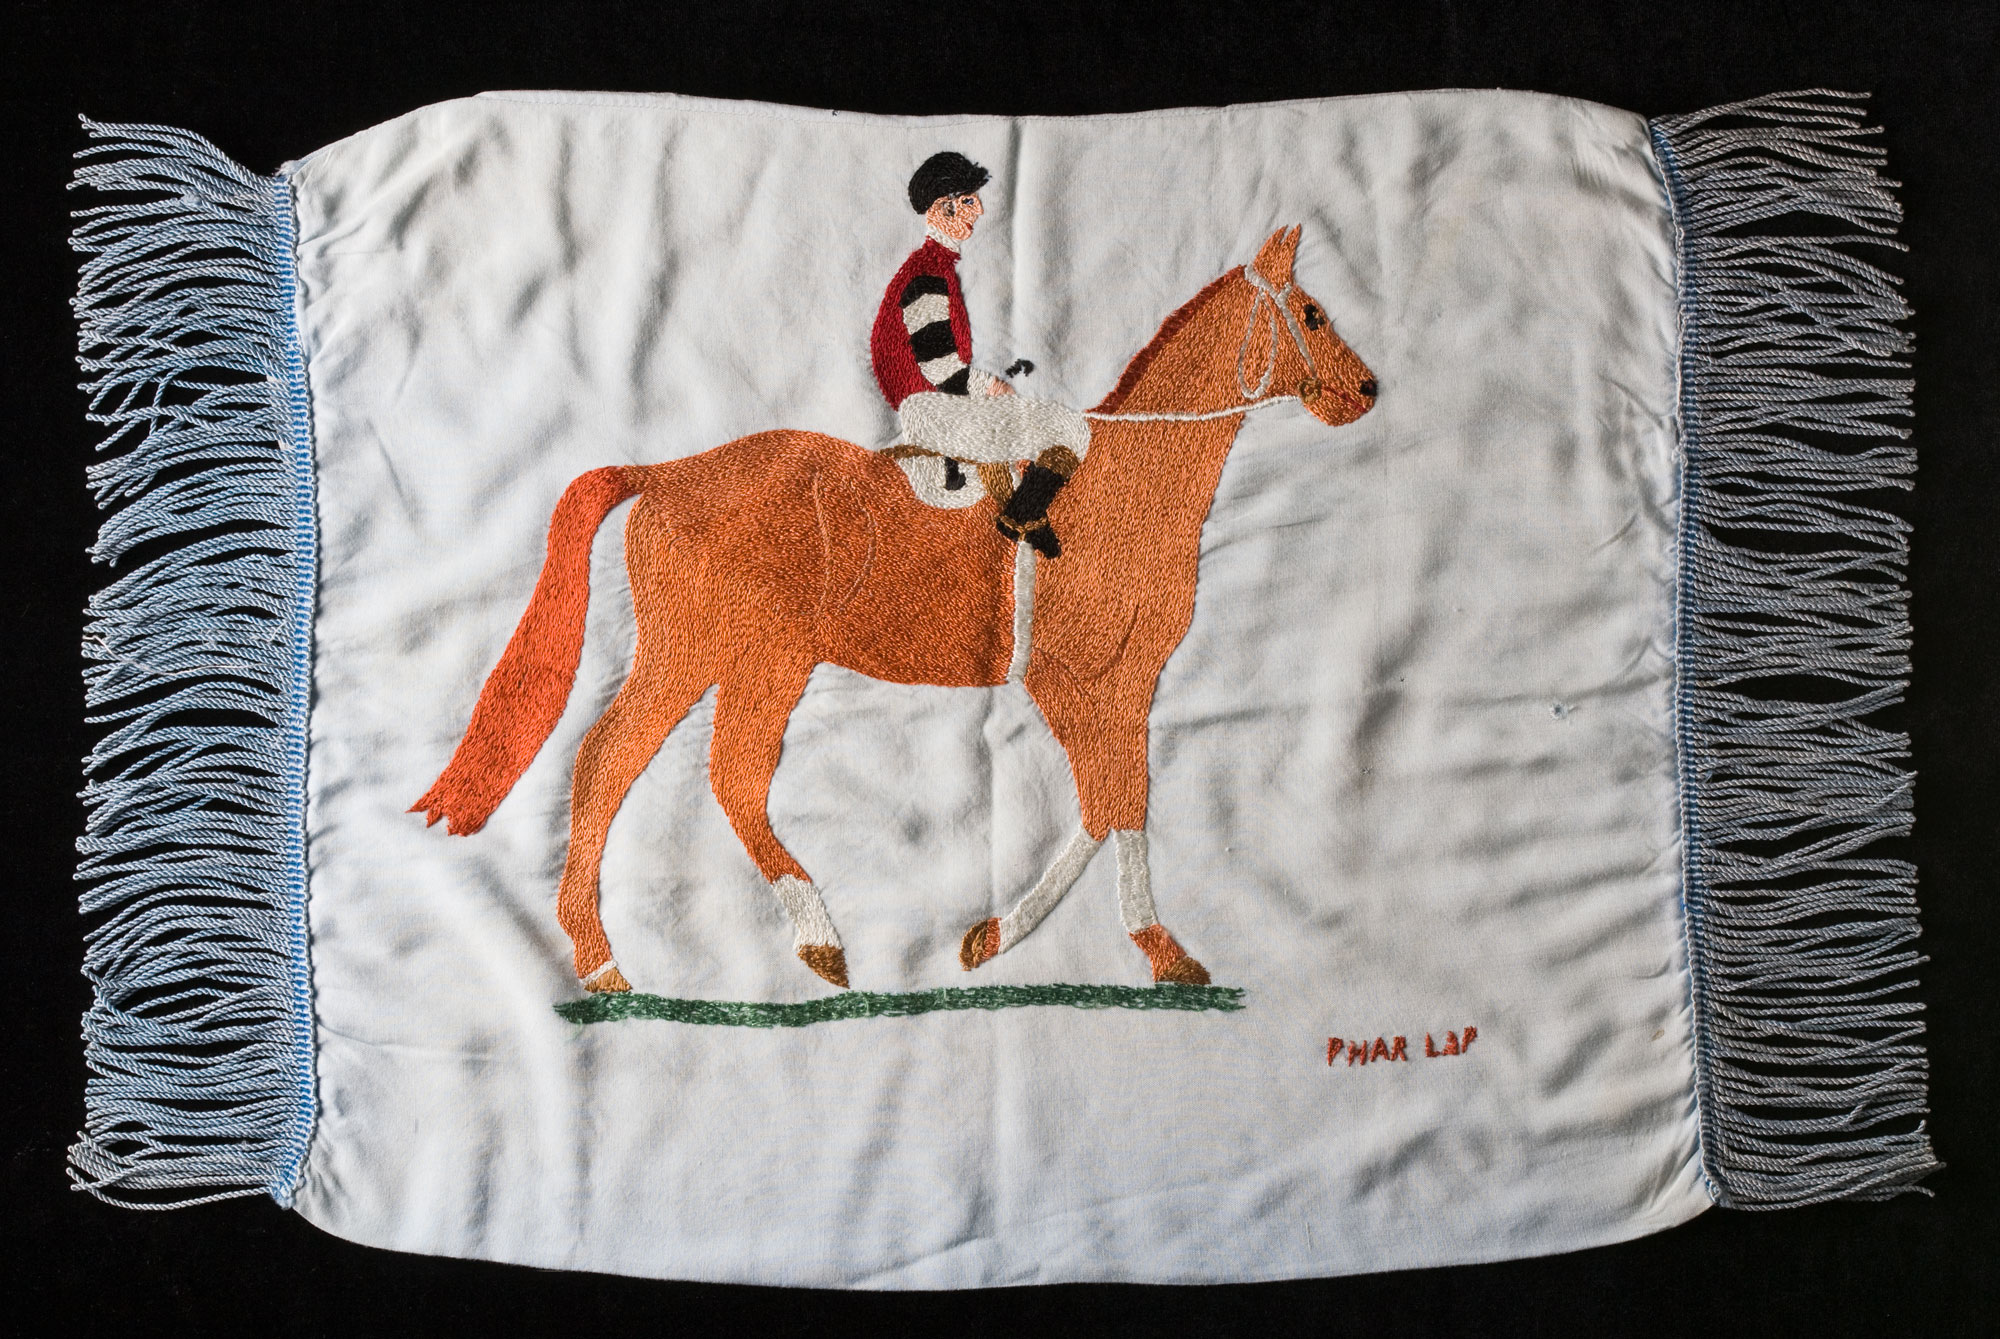 Cushion cover with hand embroidered image of Phar Lap and jockey.